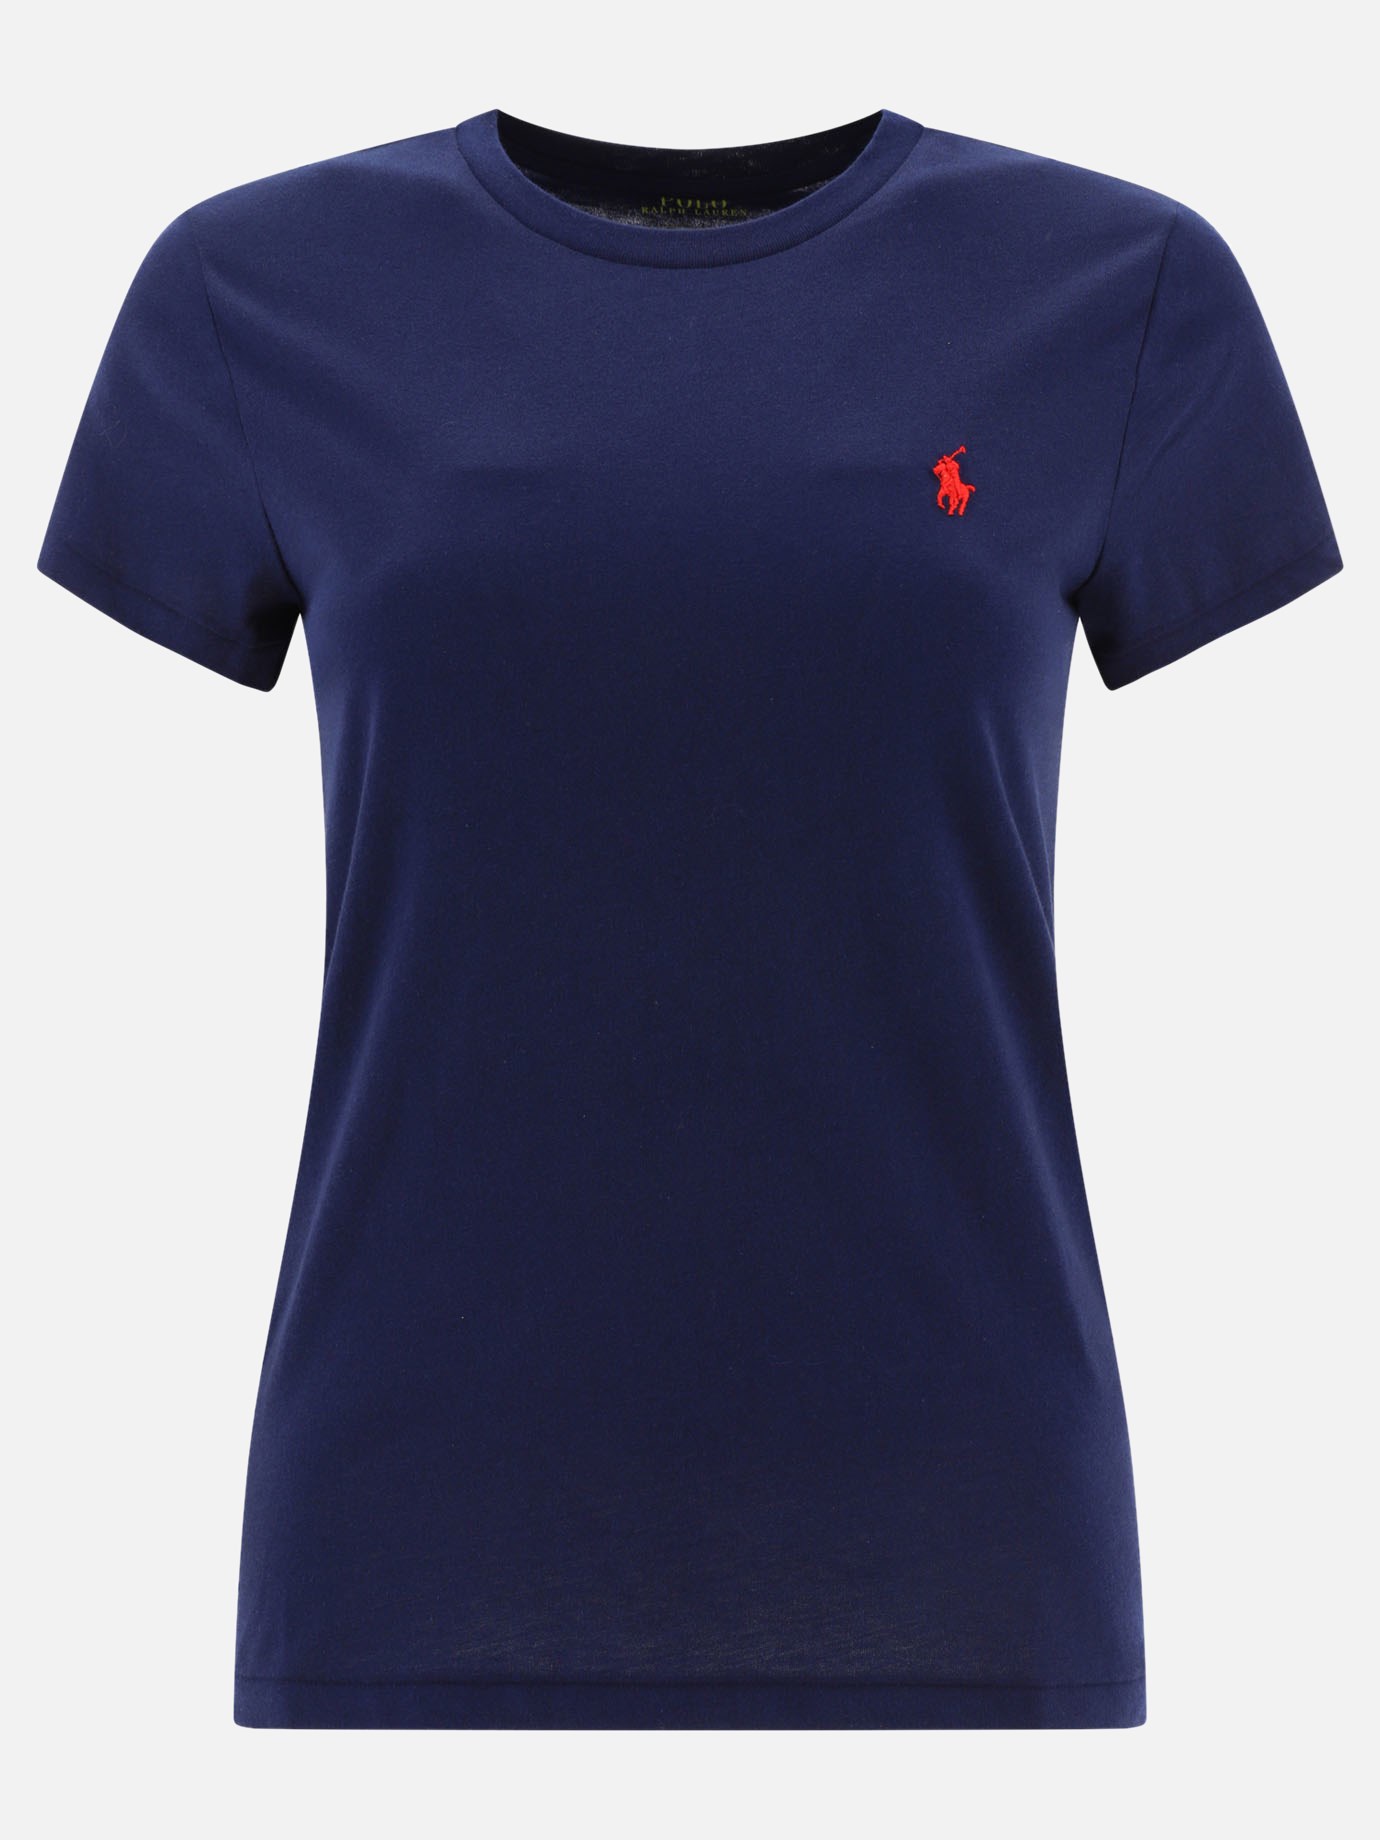  Pony  t-shirt by Polo Ralph Lauren